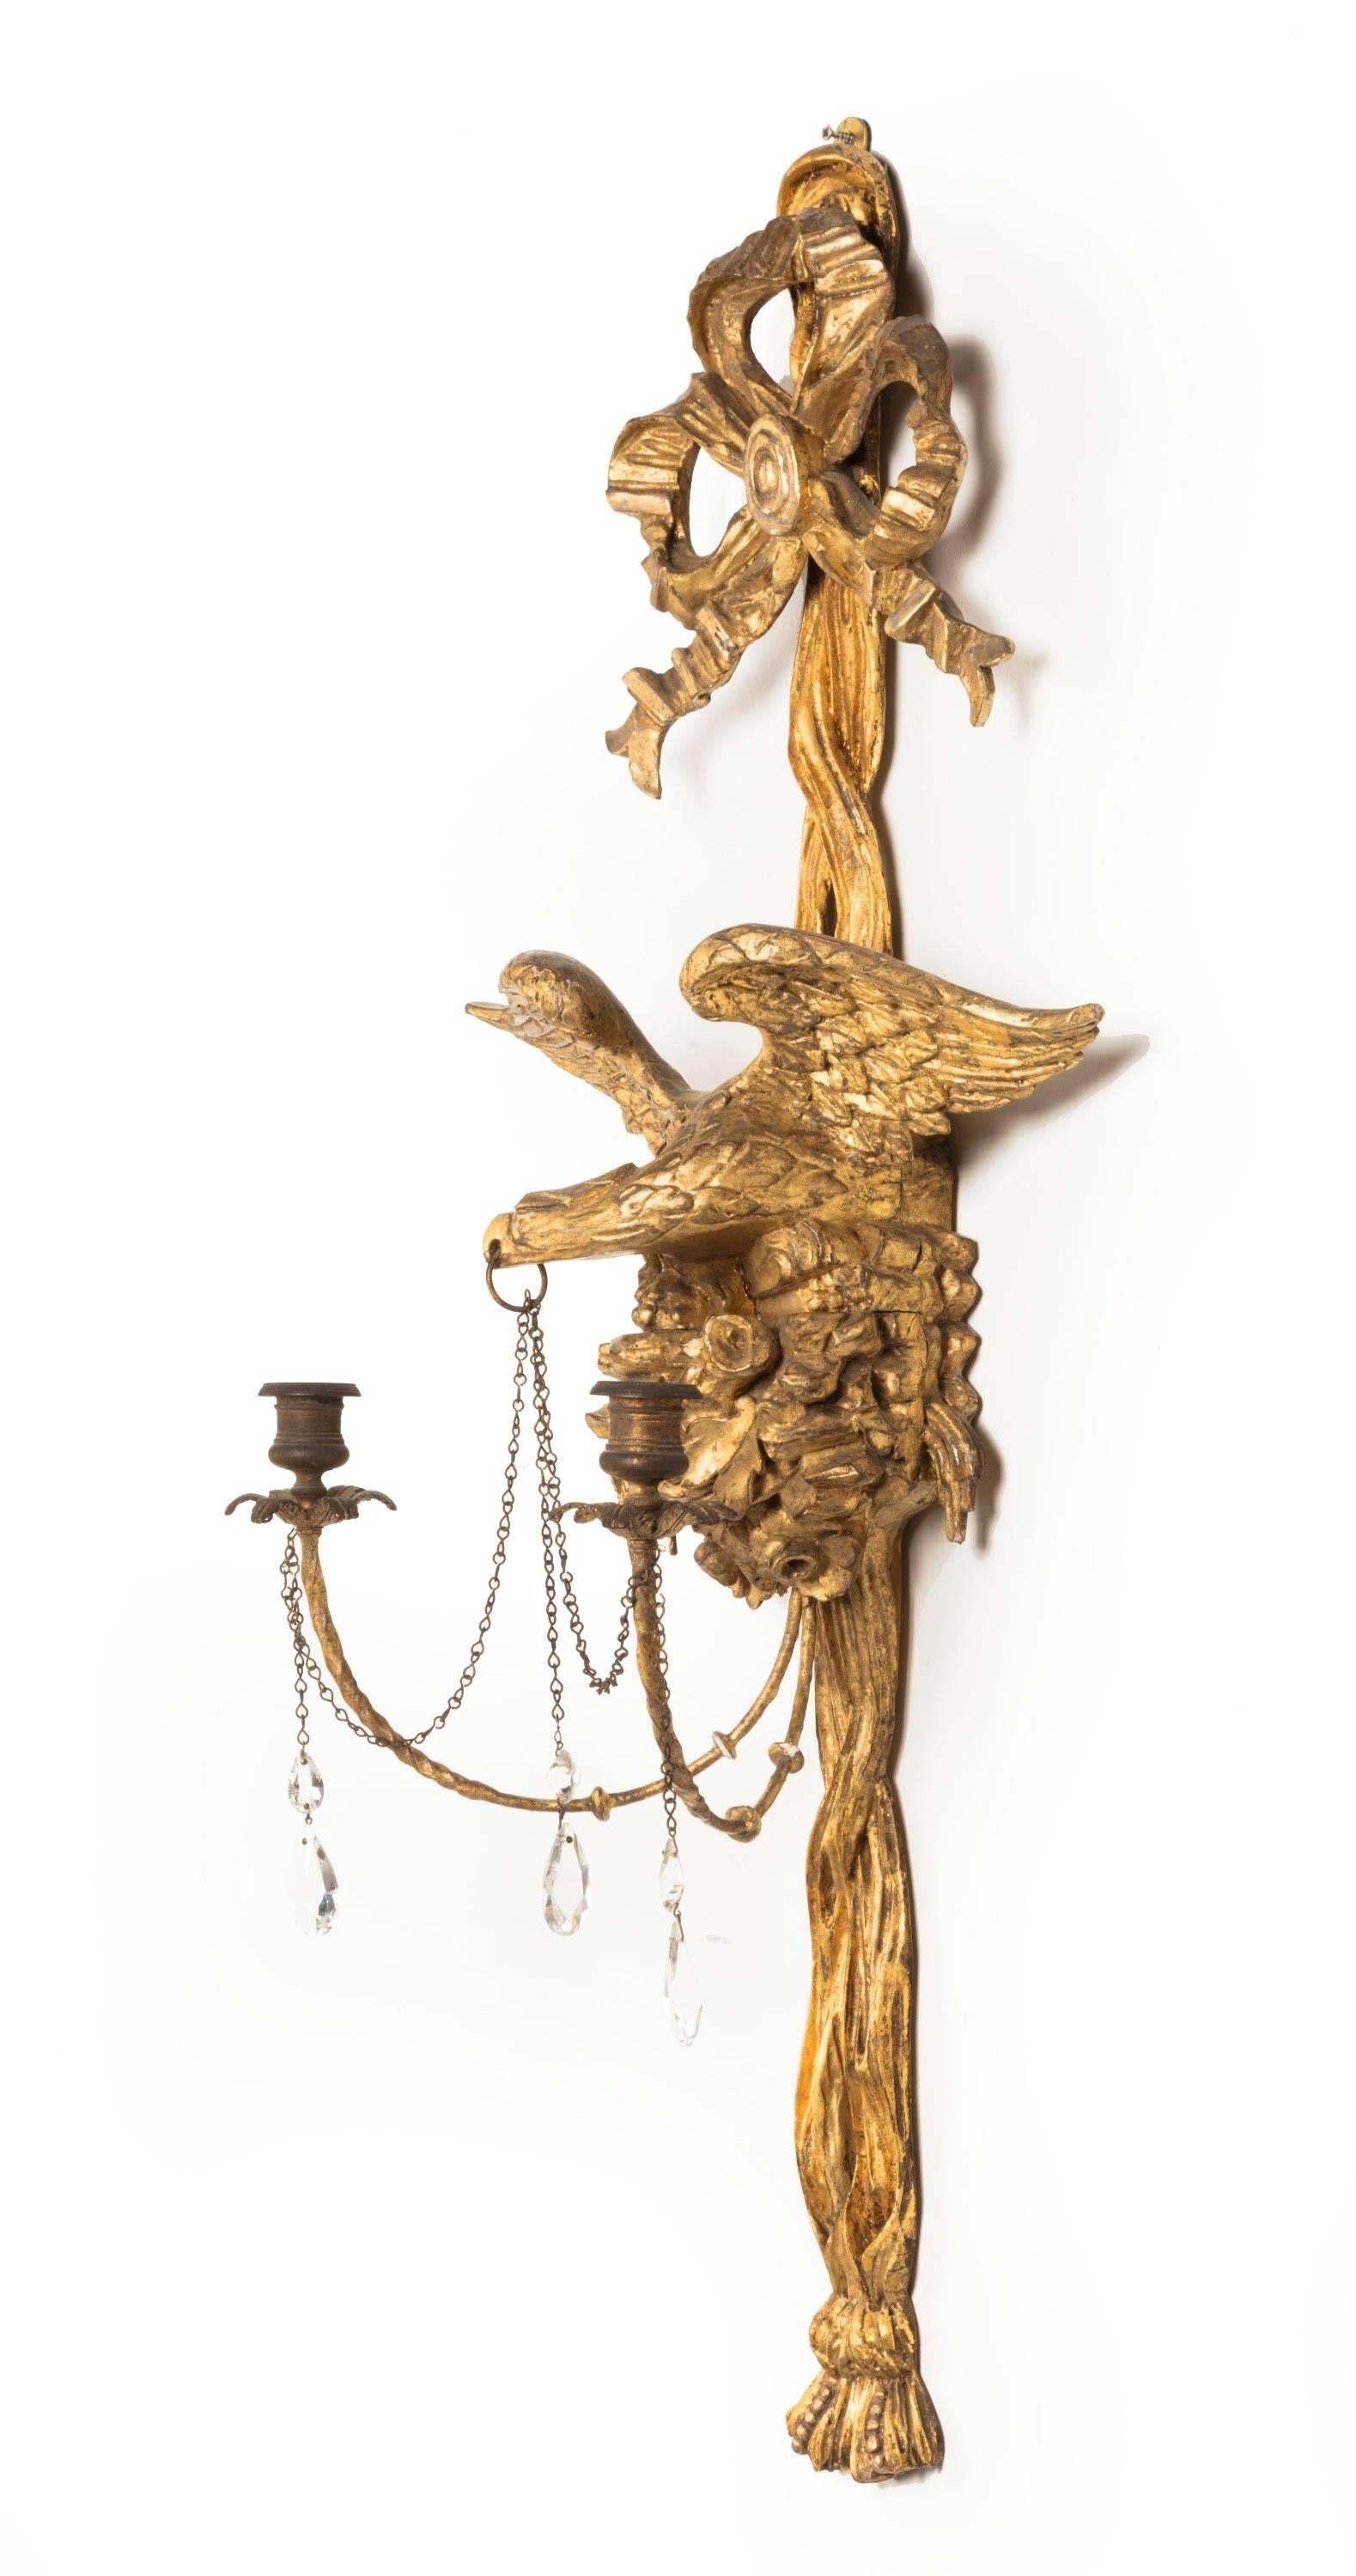 A pair of Regency period wall lights the eagle in-flight, in gilt bronze. Original candle sconces now heavily patinated. Gilding largely original with 19th century highlights.